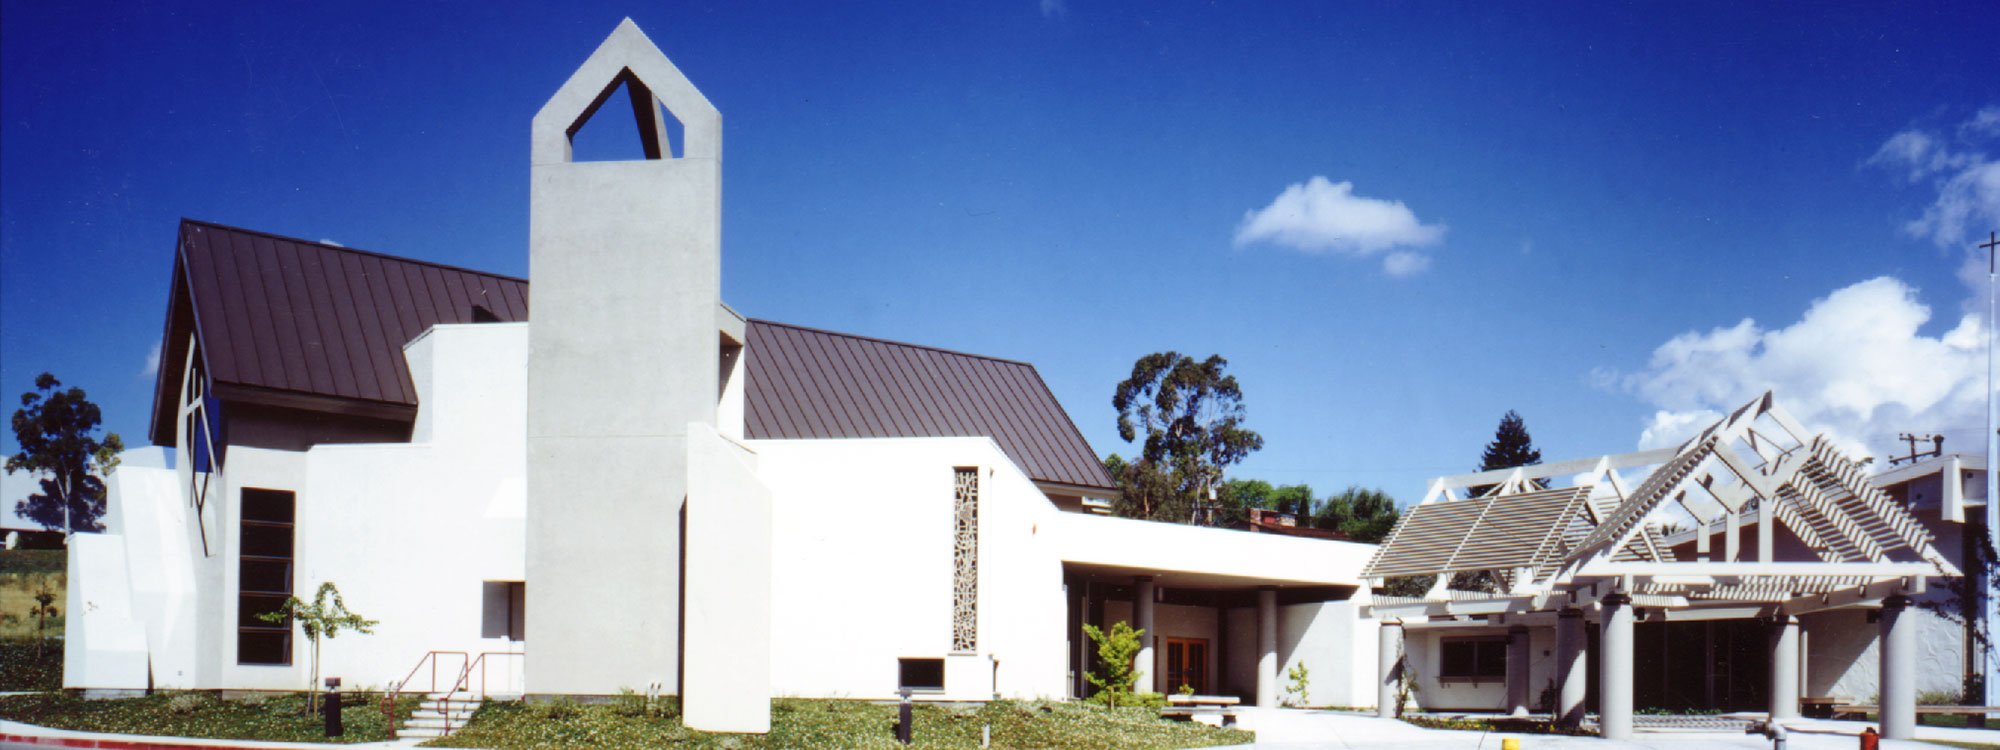 Church Building Contractor and Builder - JW Design & Construction